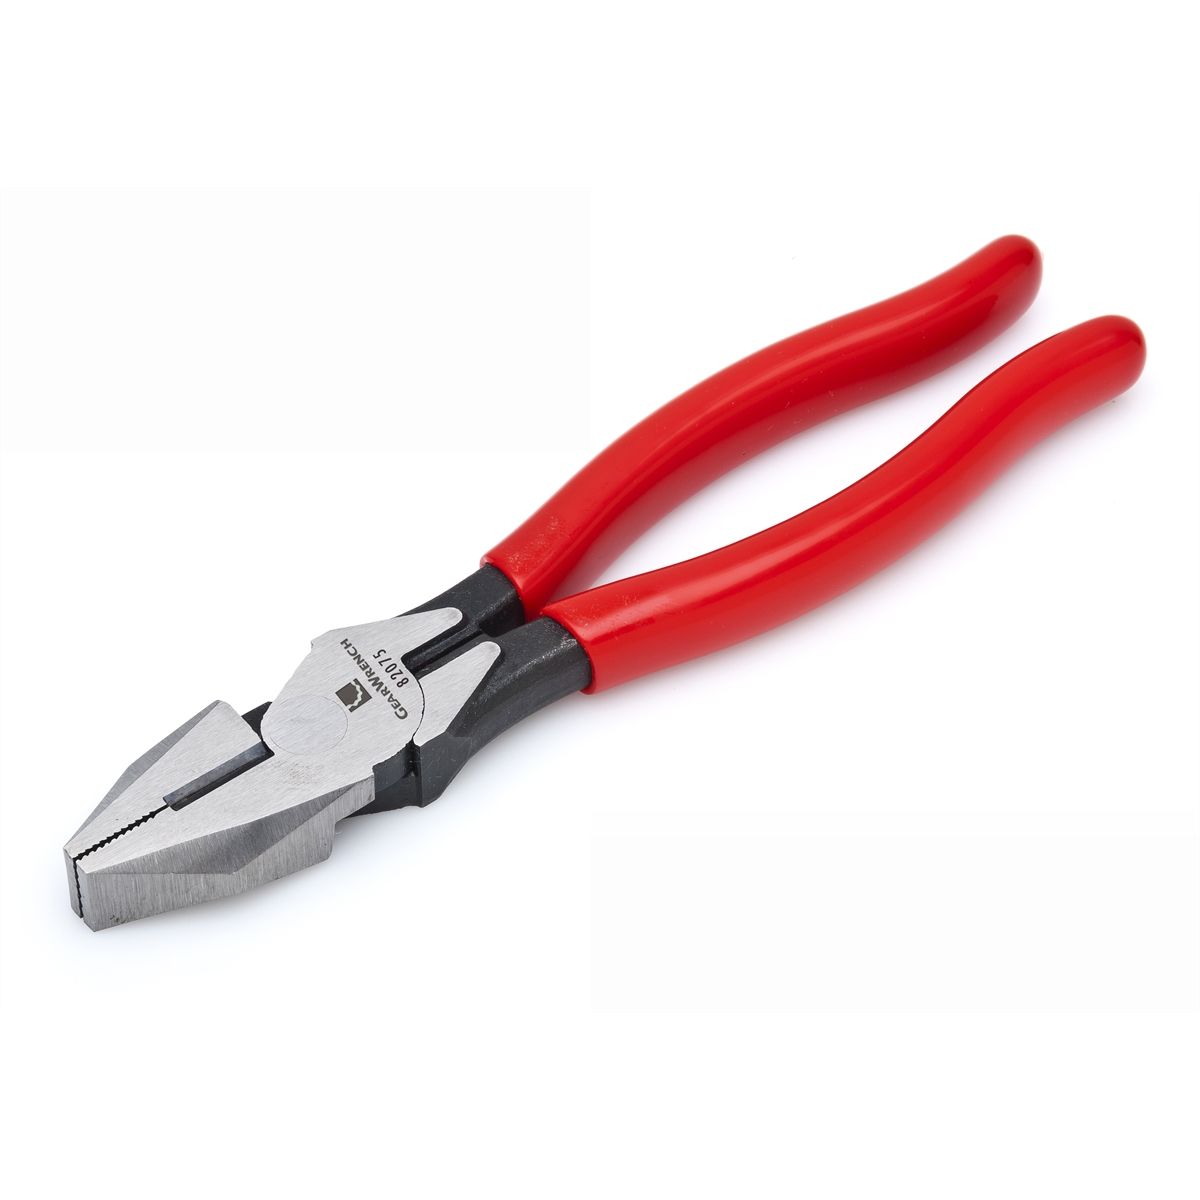 8" Linesman Side Cutting Pliers